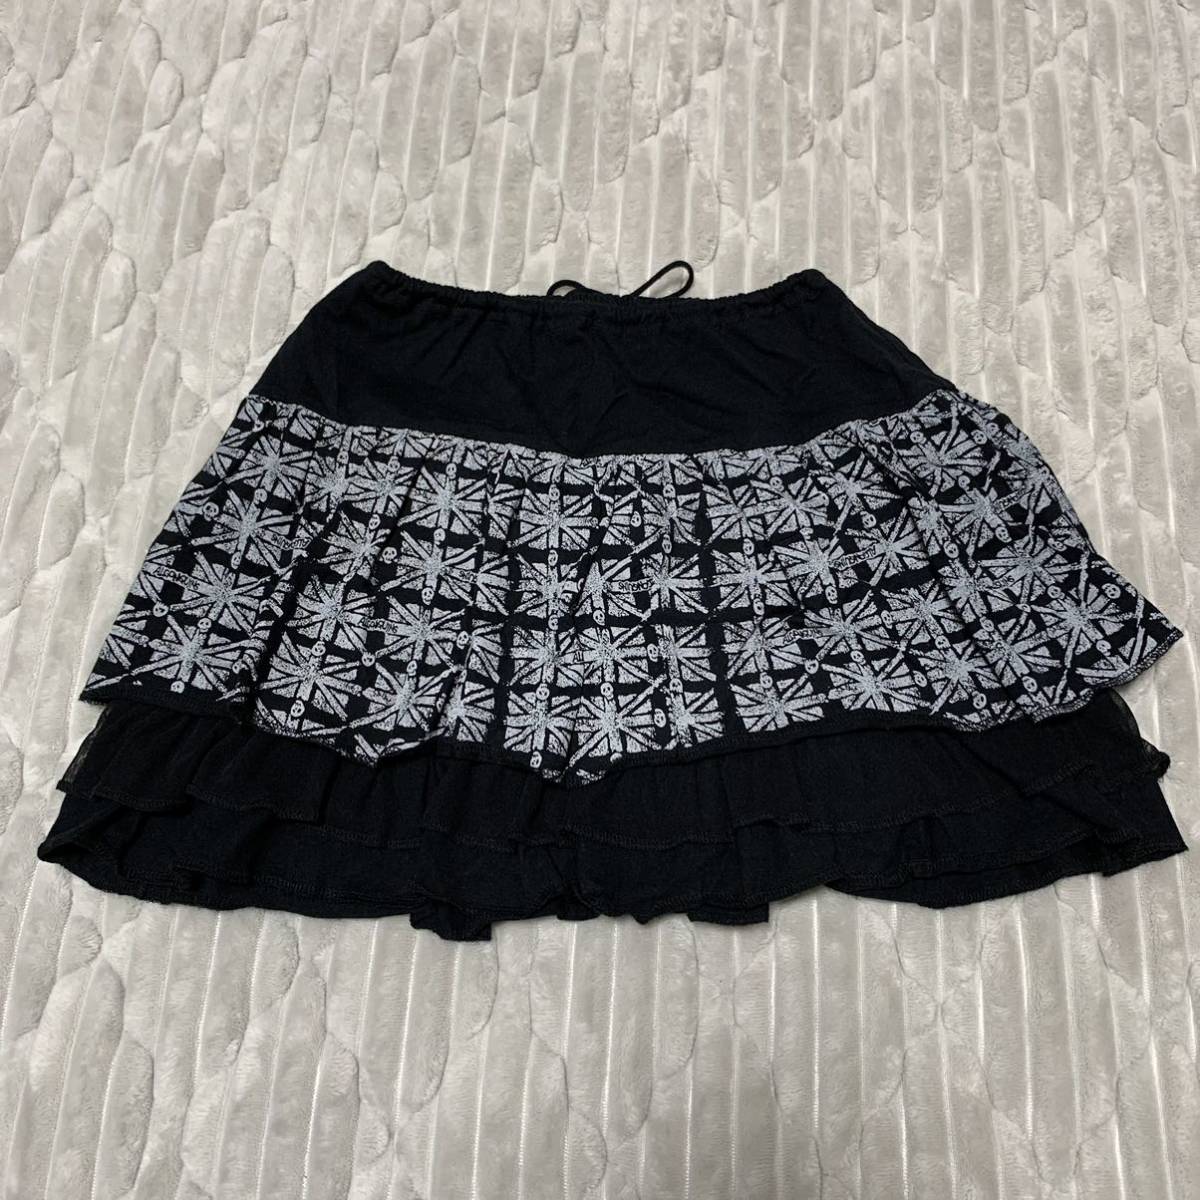 ALGONQUINS Monotone skull pattern frill skirt miniskirt ..3 step frill Algonquins punk Gothic and Lolita Vintage old clothes S size 